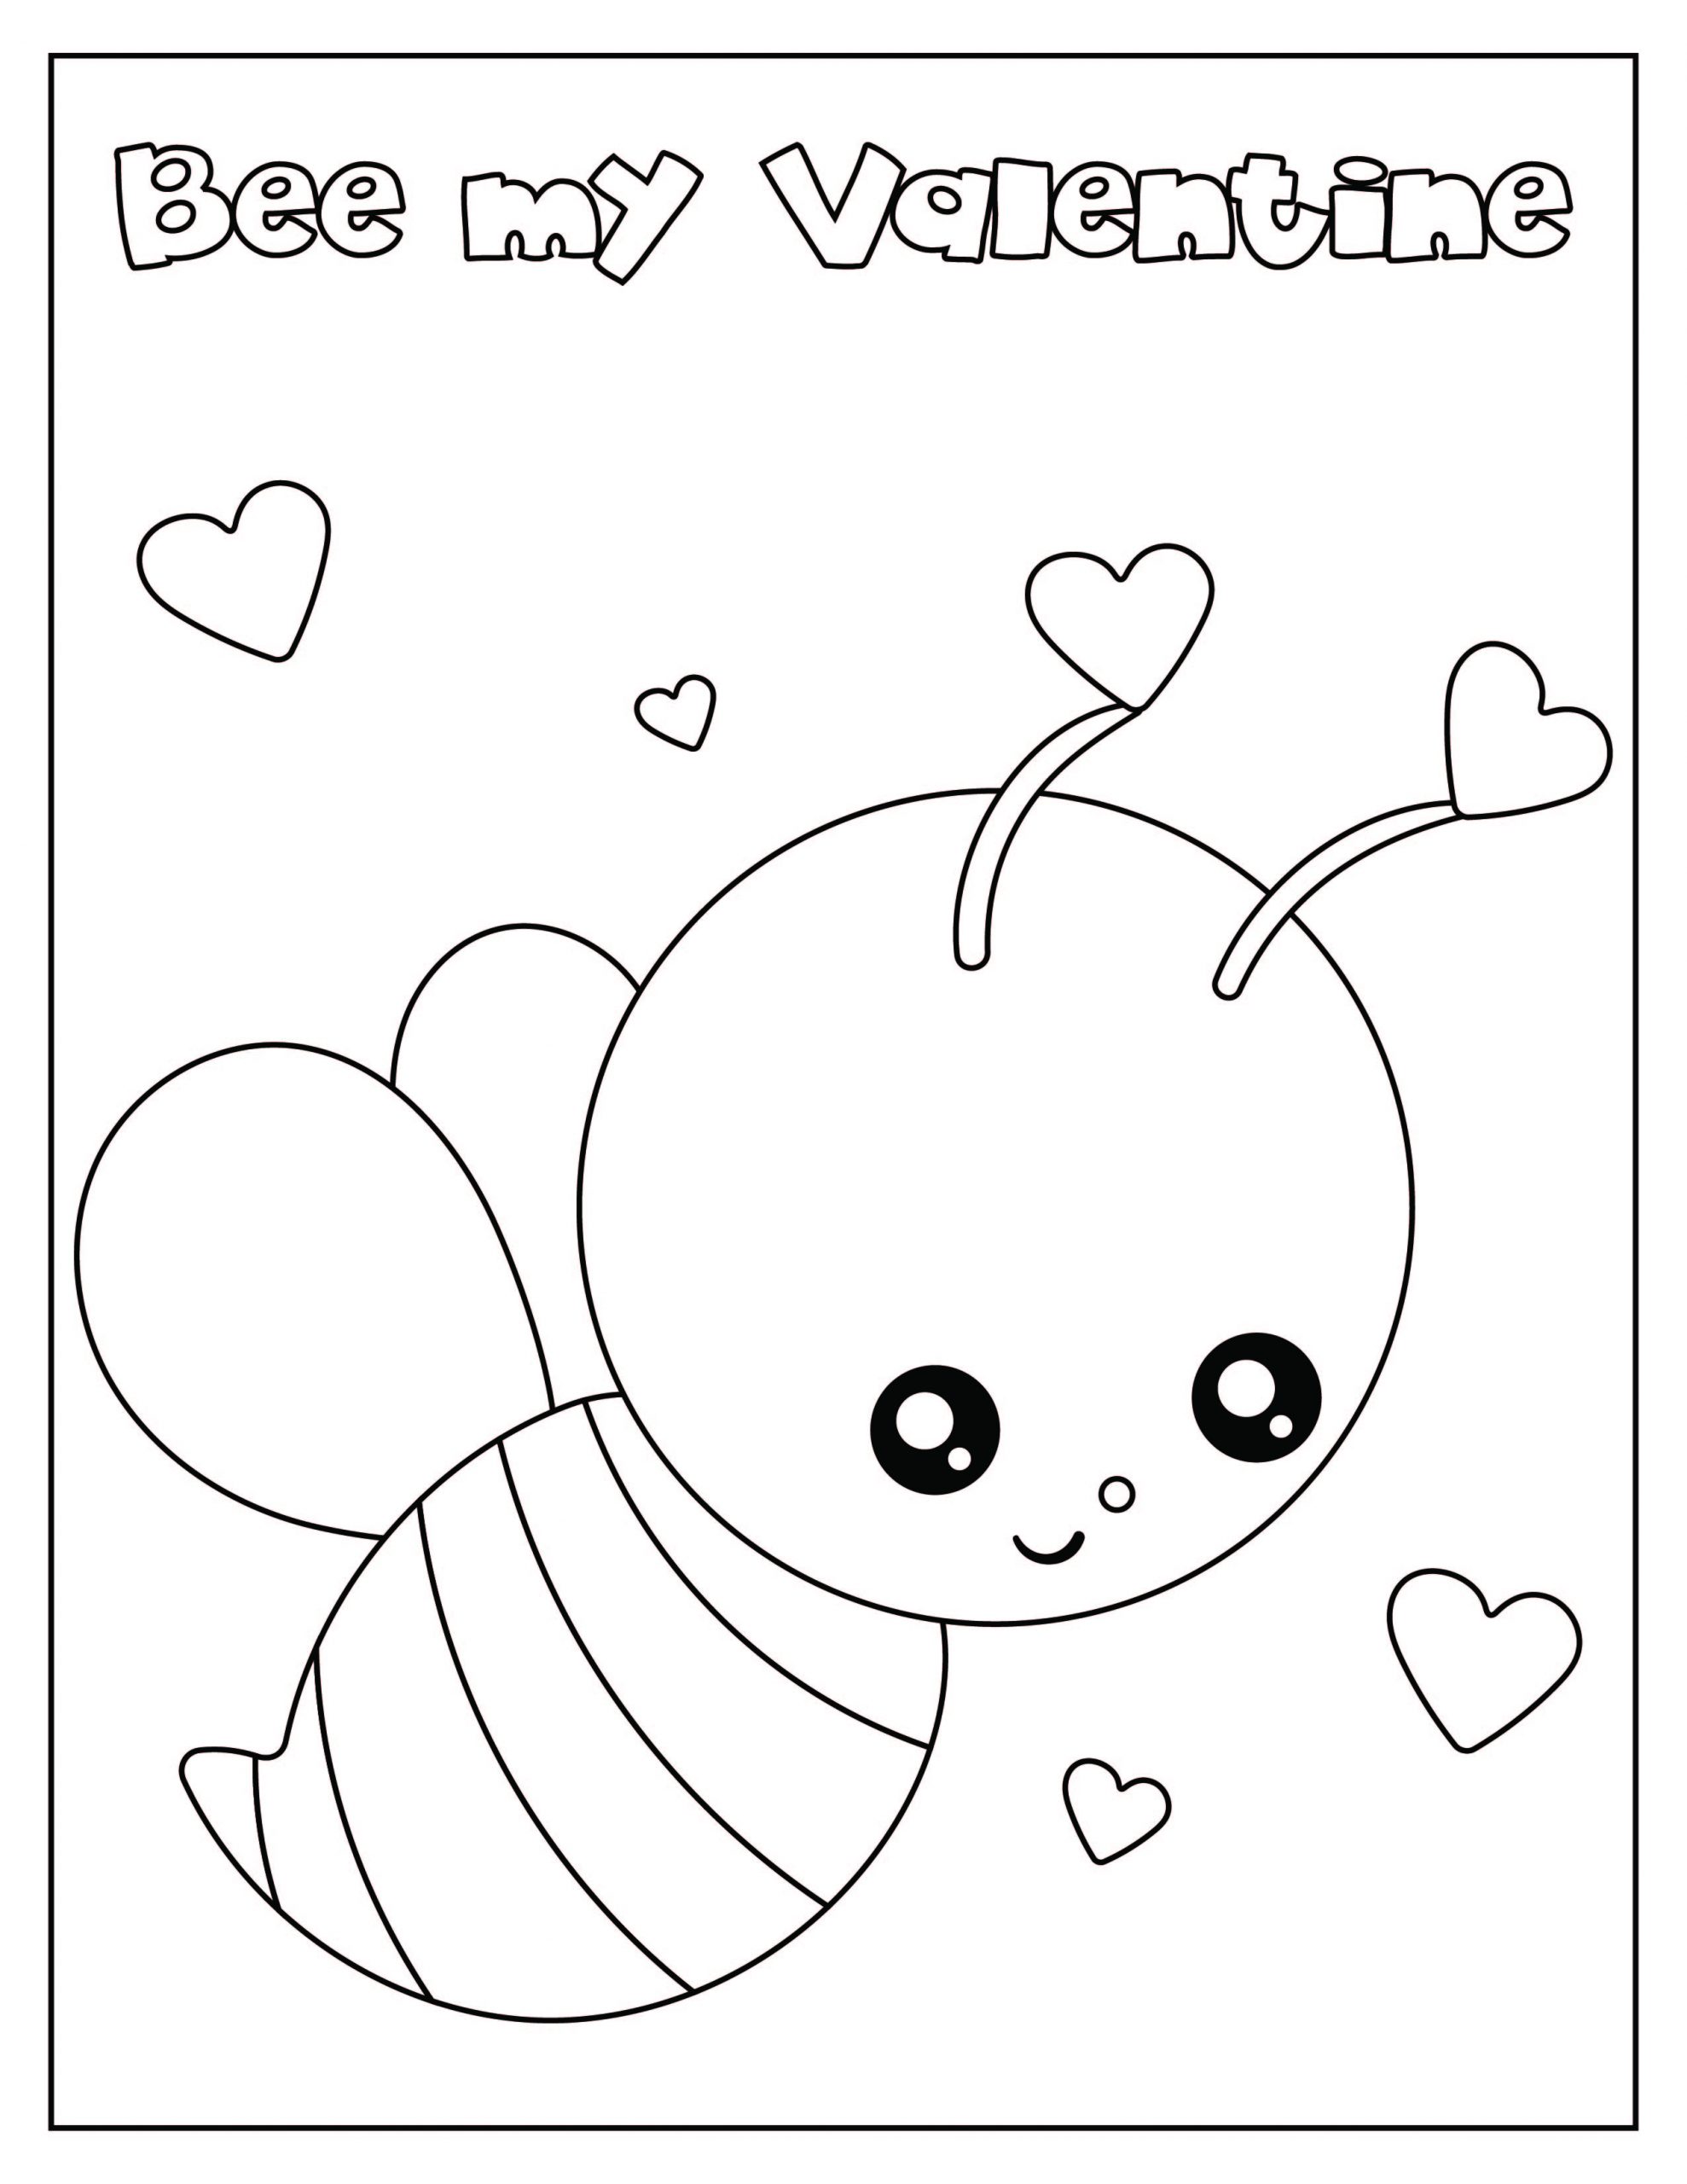 Free Valentine'S Day Coloring Pages Pdf For Instant Download! - Leap Of